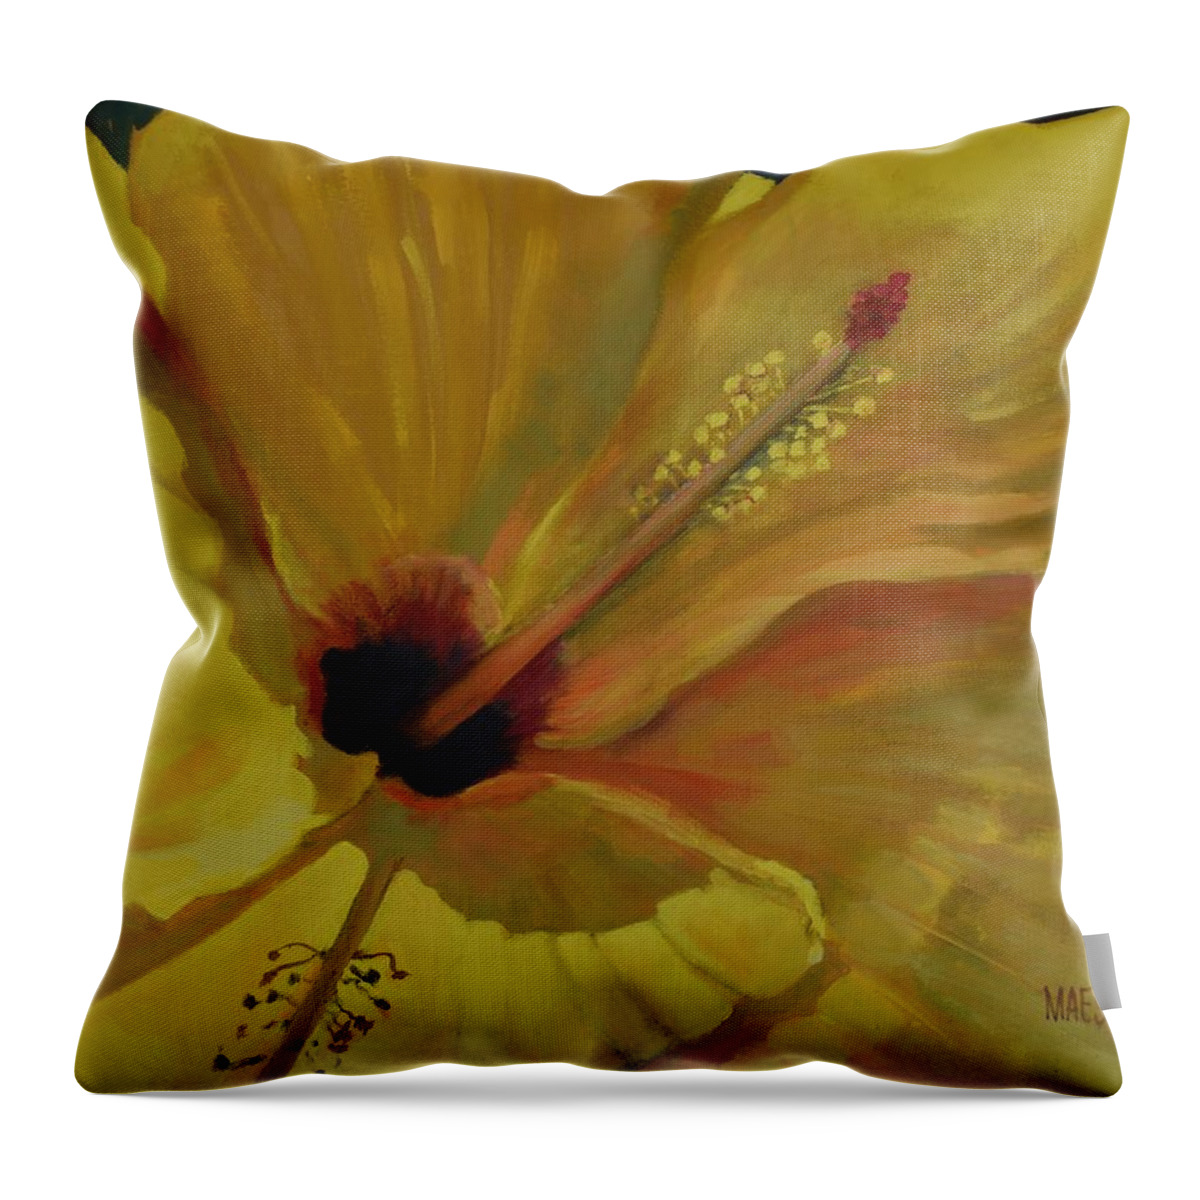 Walt Maes Throw Pillow featuring the painting Yellow Beauty by Walt Maes